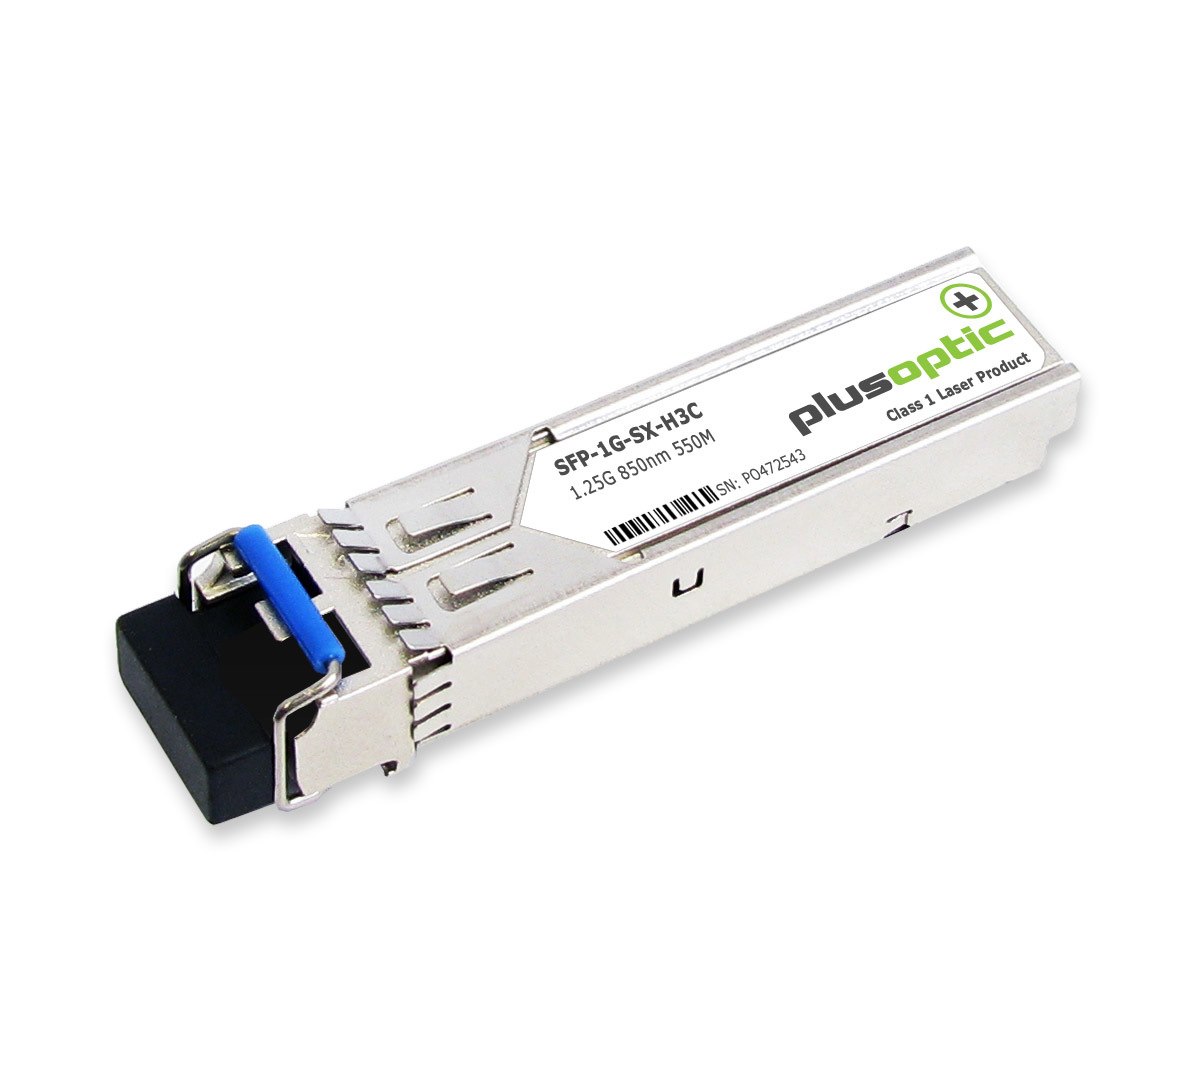 PlusOptic HP / H3C Compatible (JD118B Jd493a) 1.25G, SFP, 850NM, 550M Transceiver, LC Connector For MMF With Dom | PlusOptic SFP-1G-SX-H3C